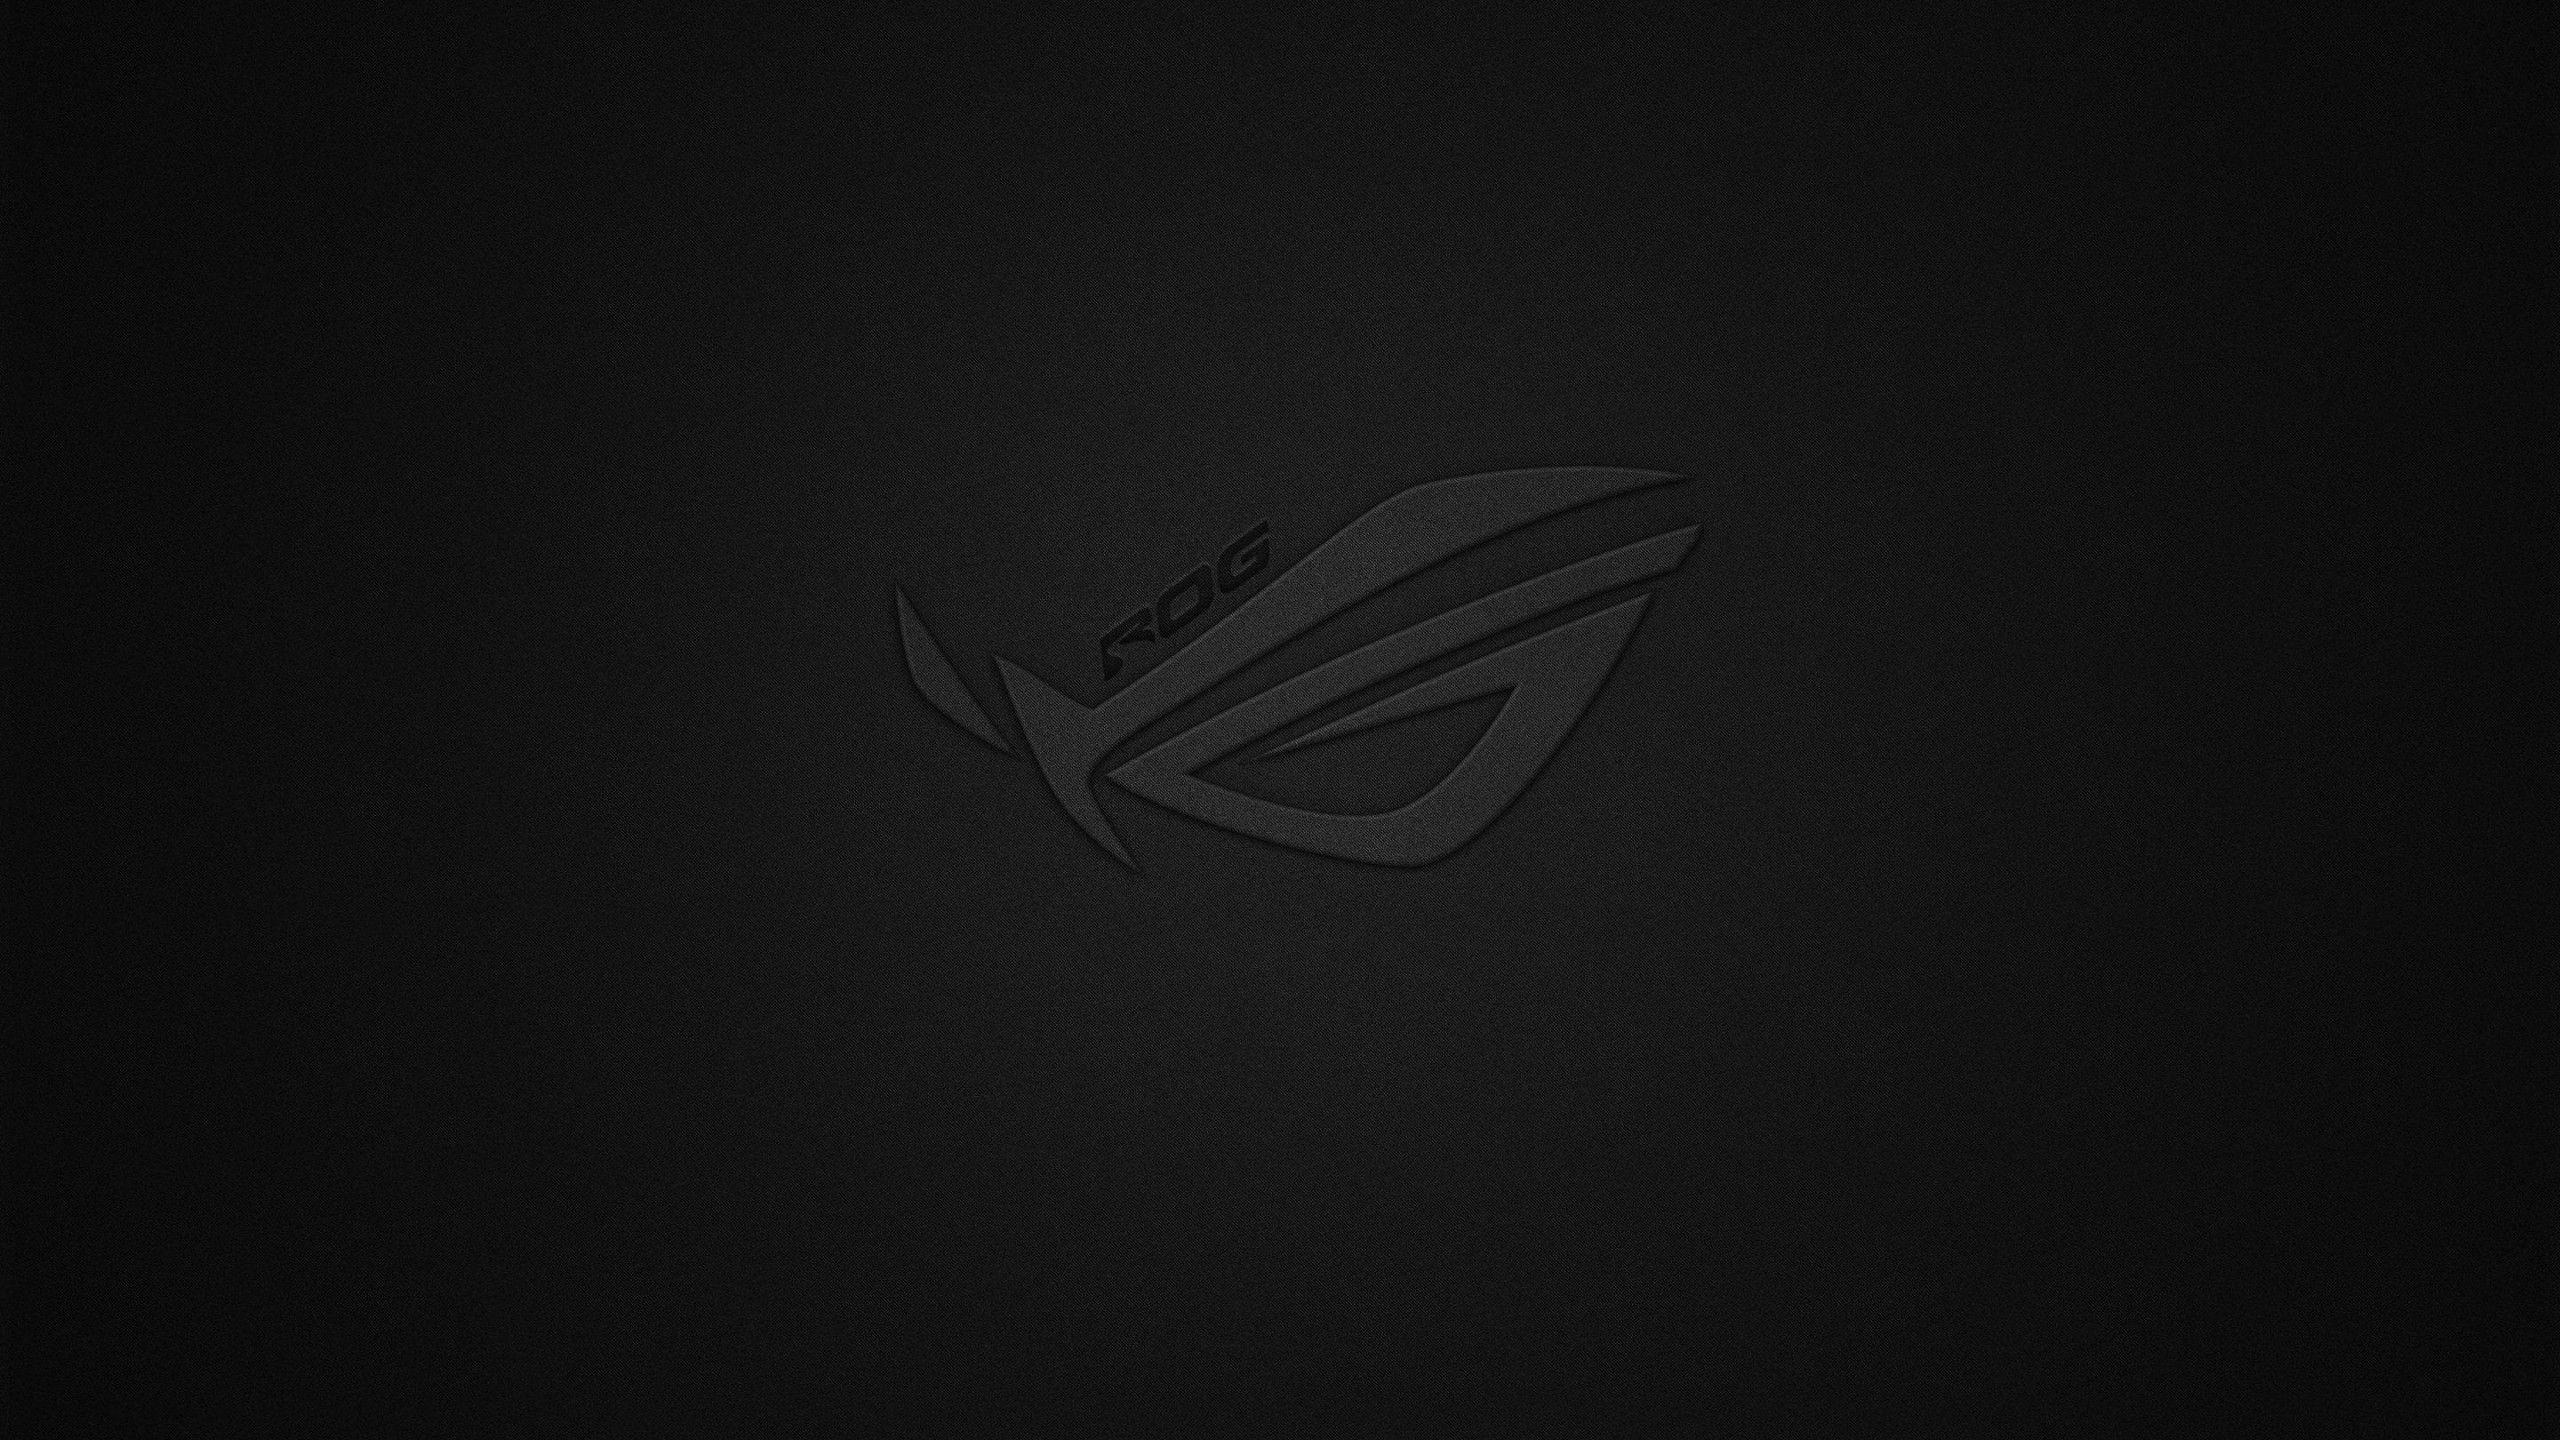 ASUS TUF Wallpapers - Top Free ASUS TUF Backgrounds ...